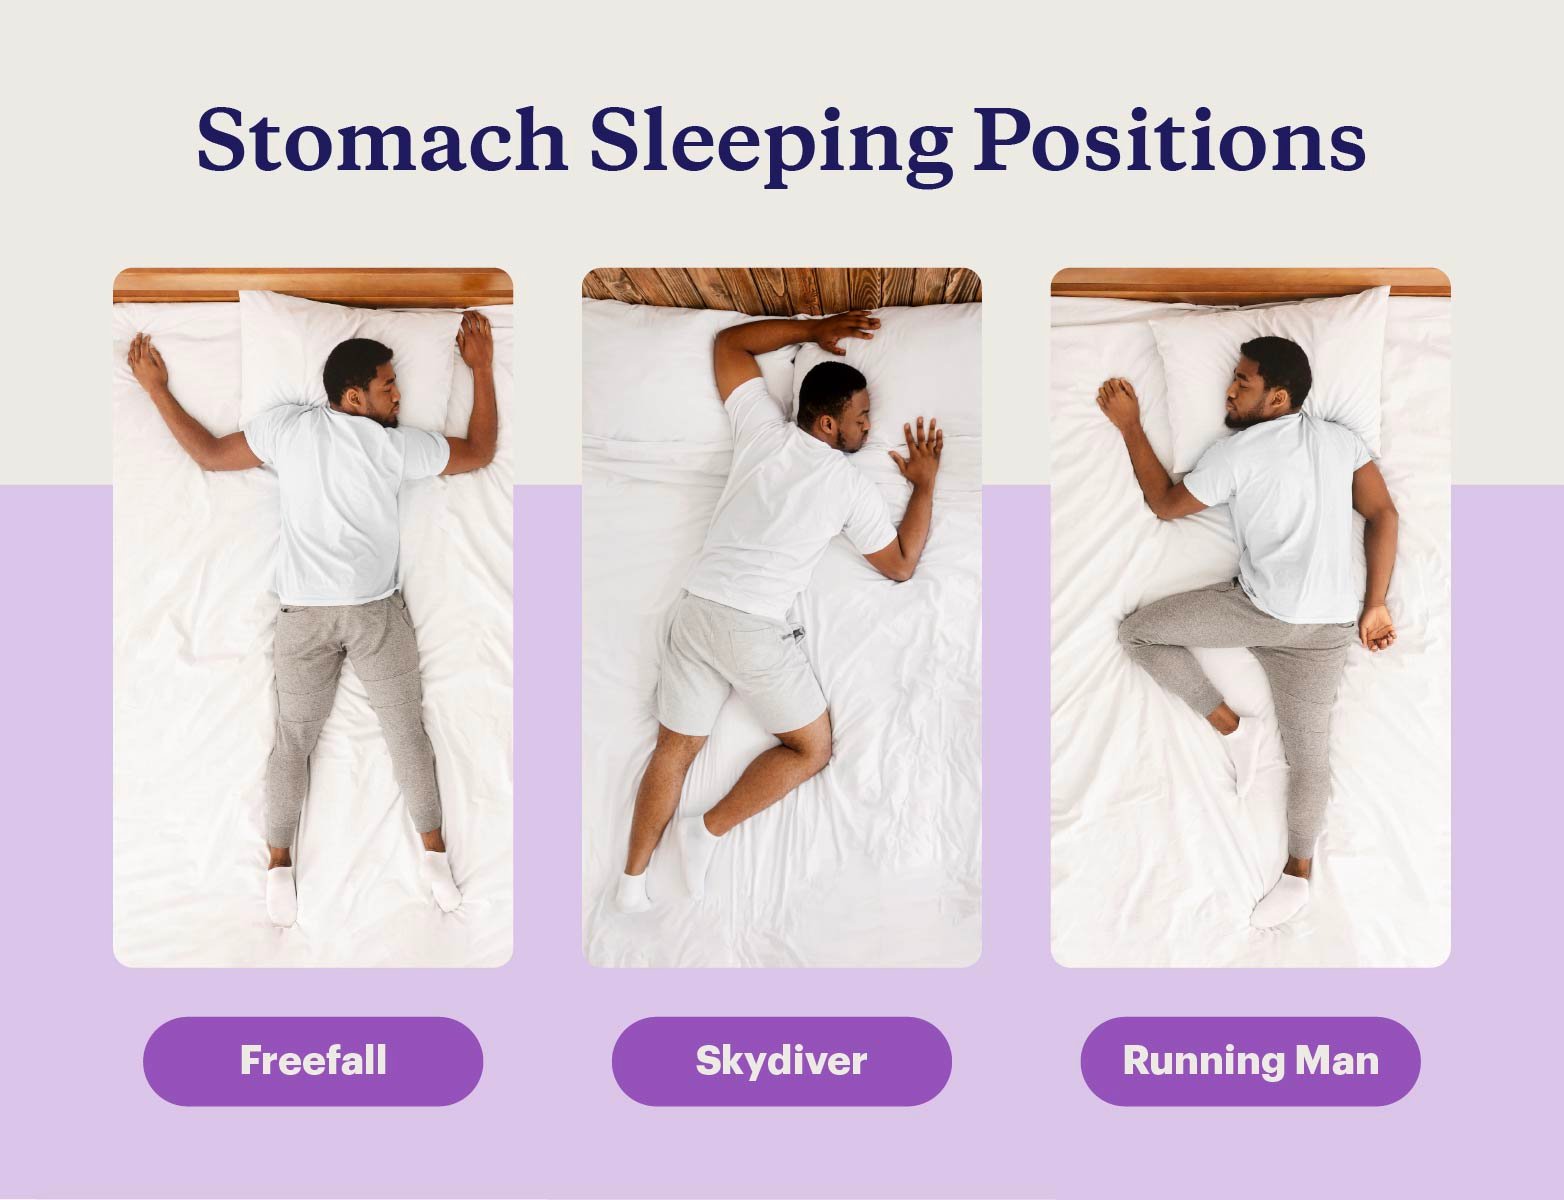 Graphic labeling the three different stomach sleeping positions.